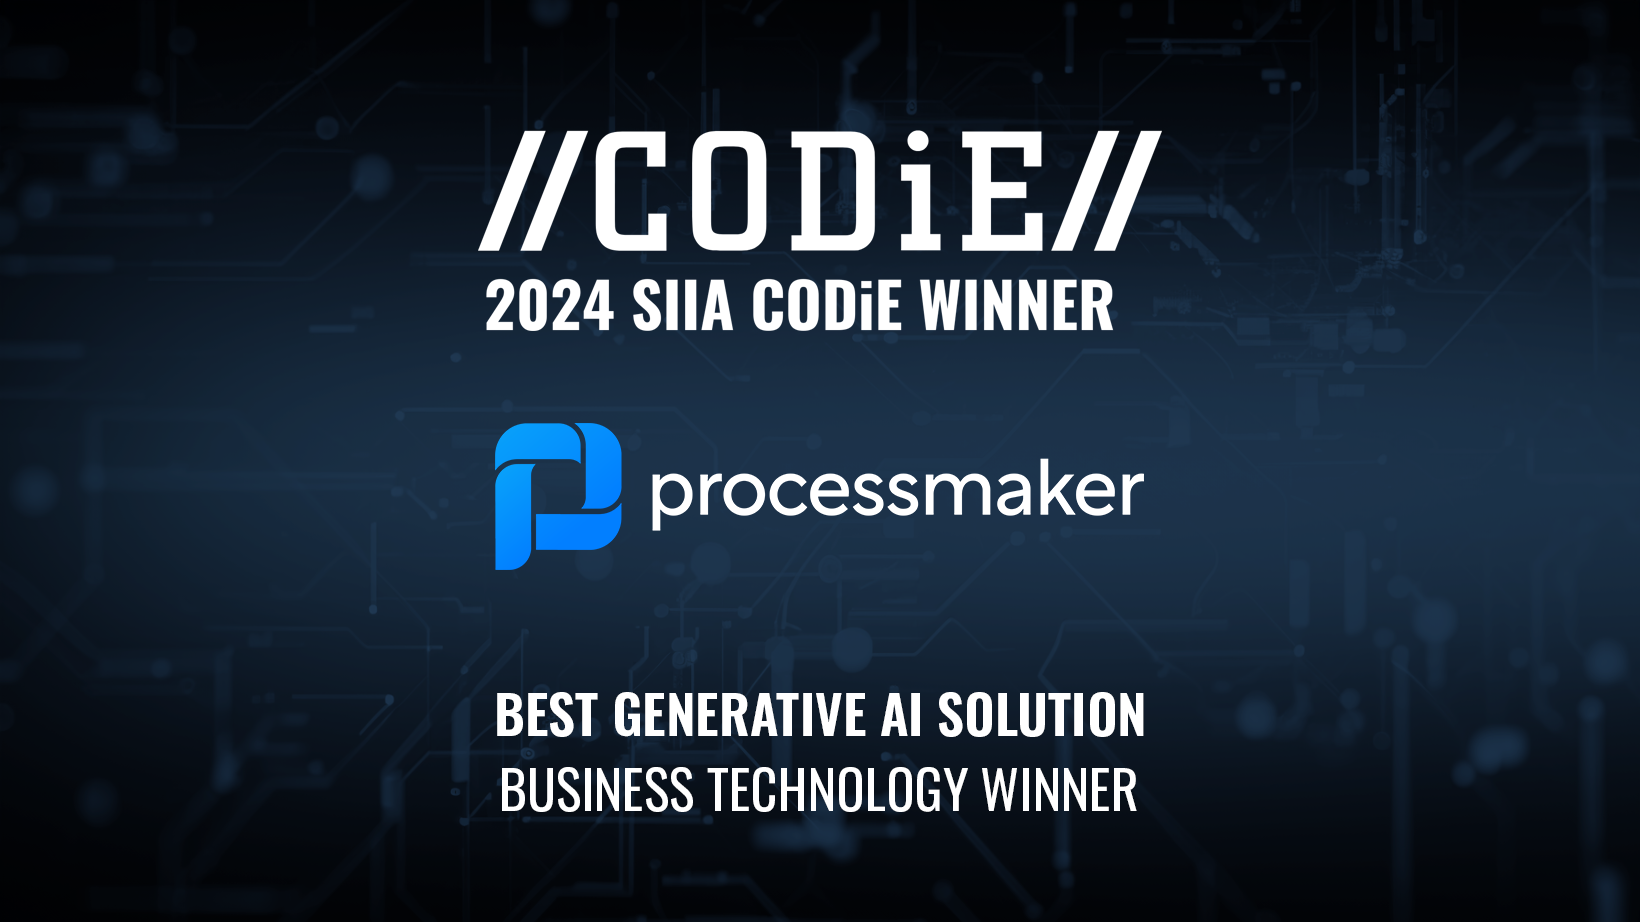 ProcessMaker Wins 2024 SIIA CODiE Award for Best Generative AI Solution